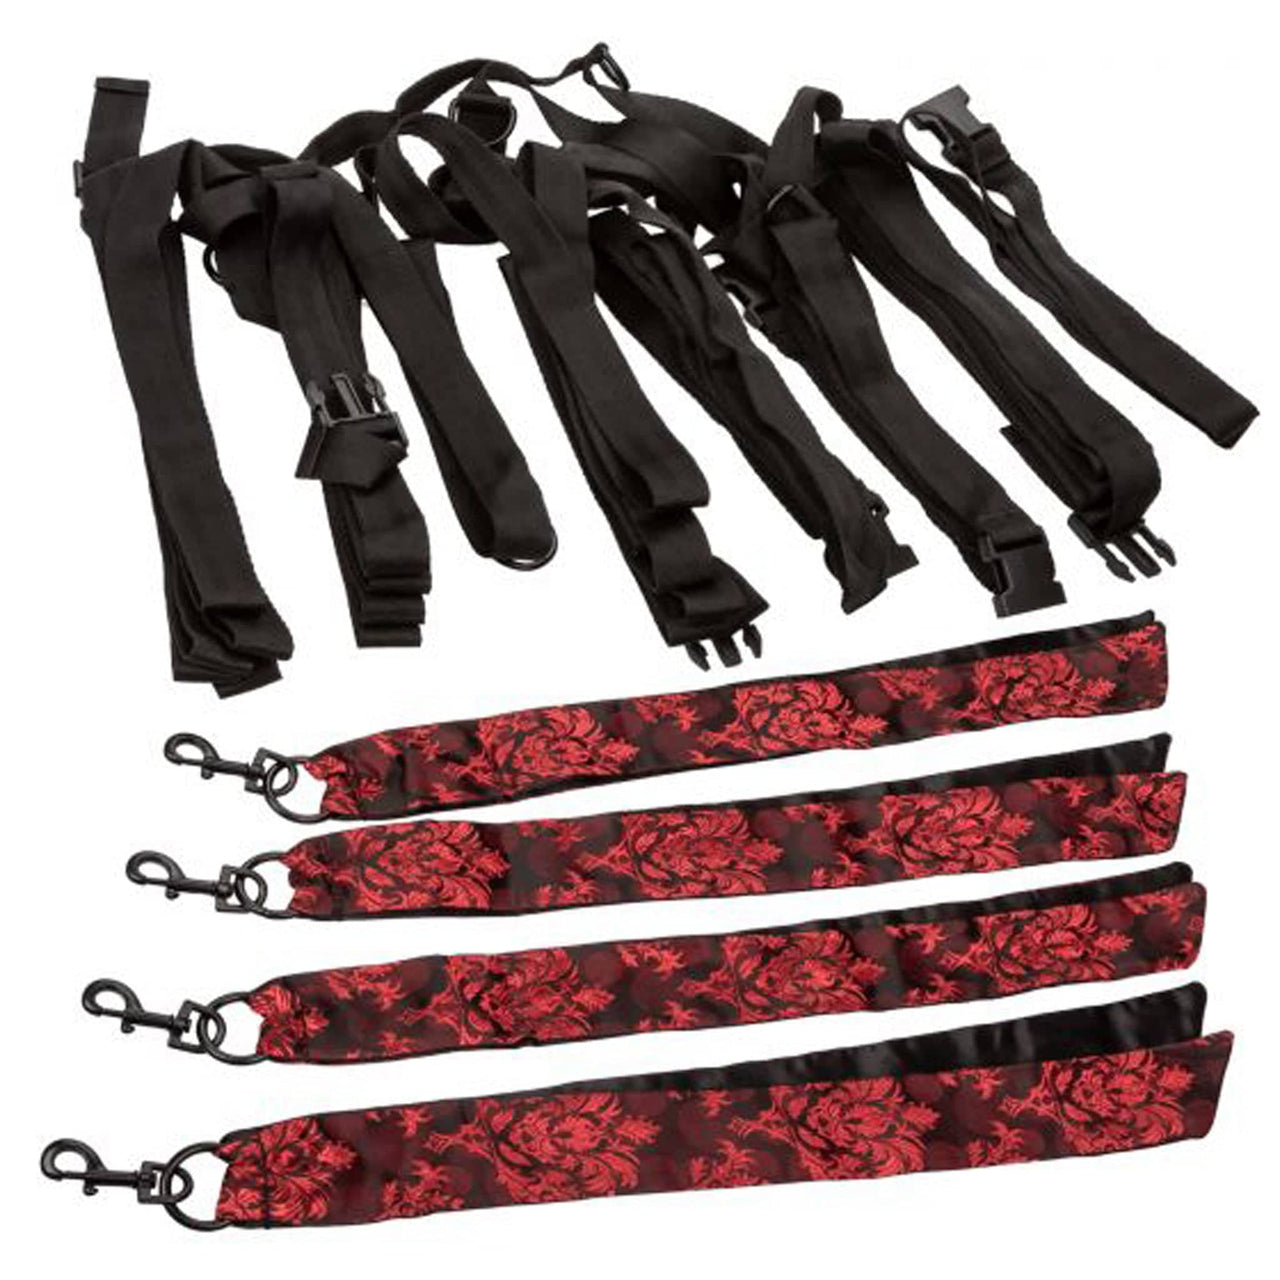  CalExotics Scandal Universal Cuff Set – Luxury Bondage  Handcuffs – BDSM Toys for Couples - Red : Health & Household